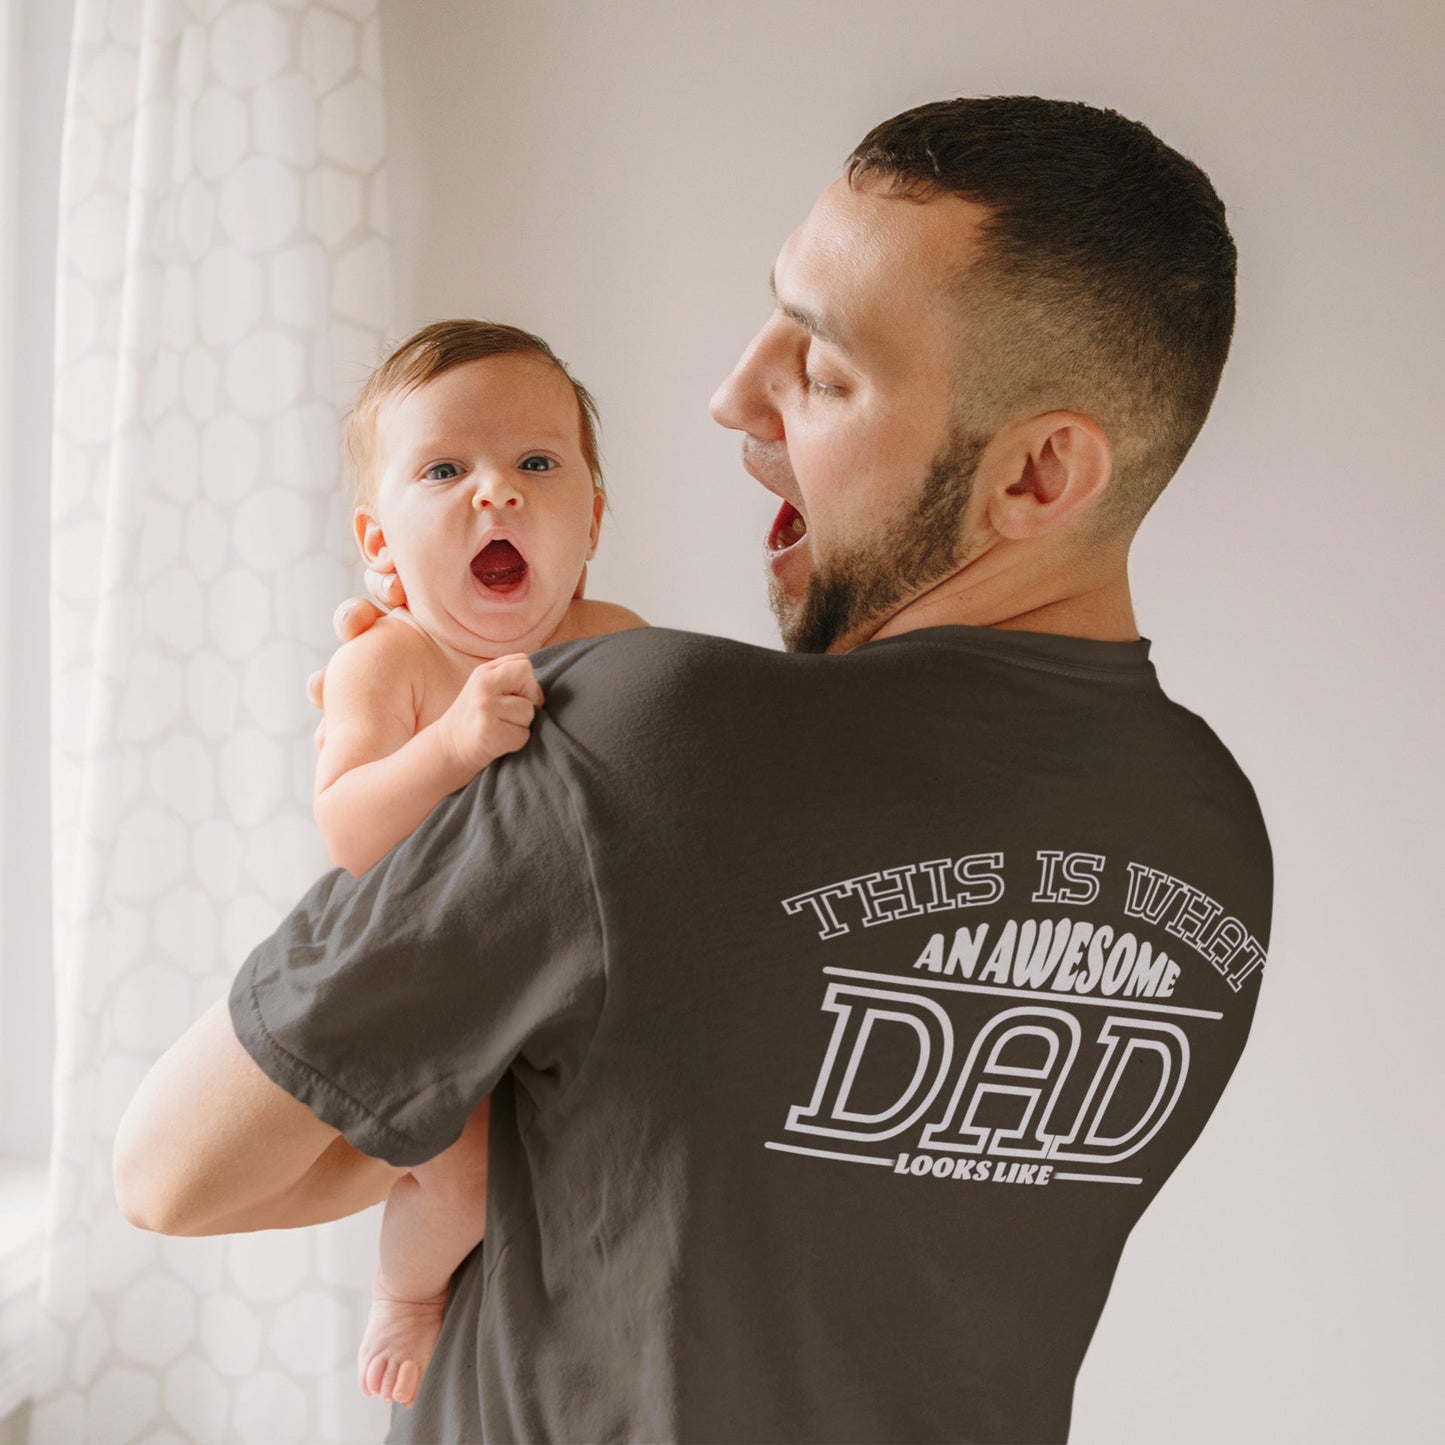 Summer T-shirt for Men ( That's What An Awesome Dad Looks Like )